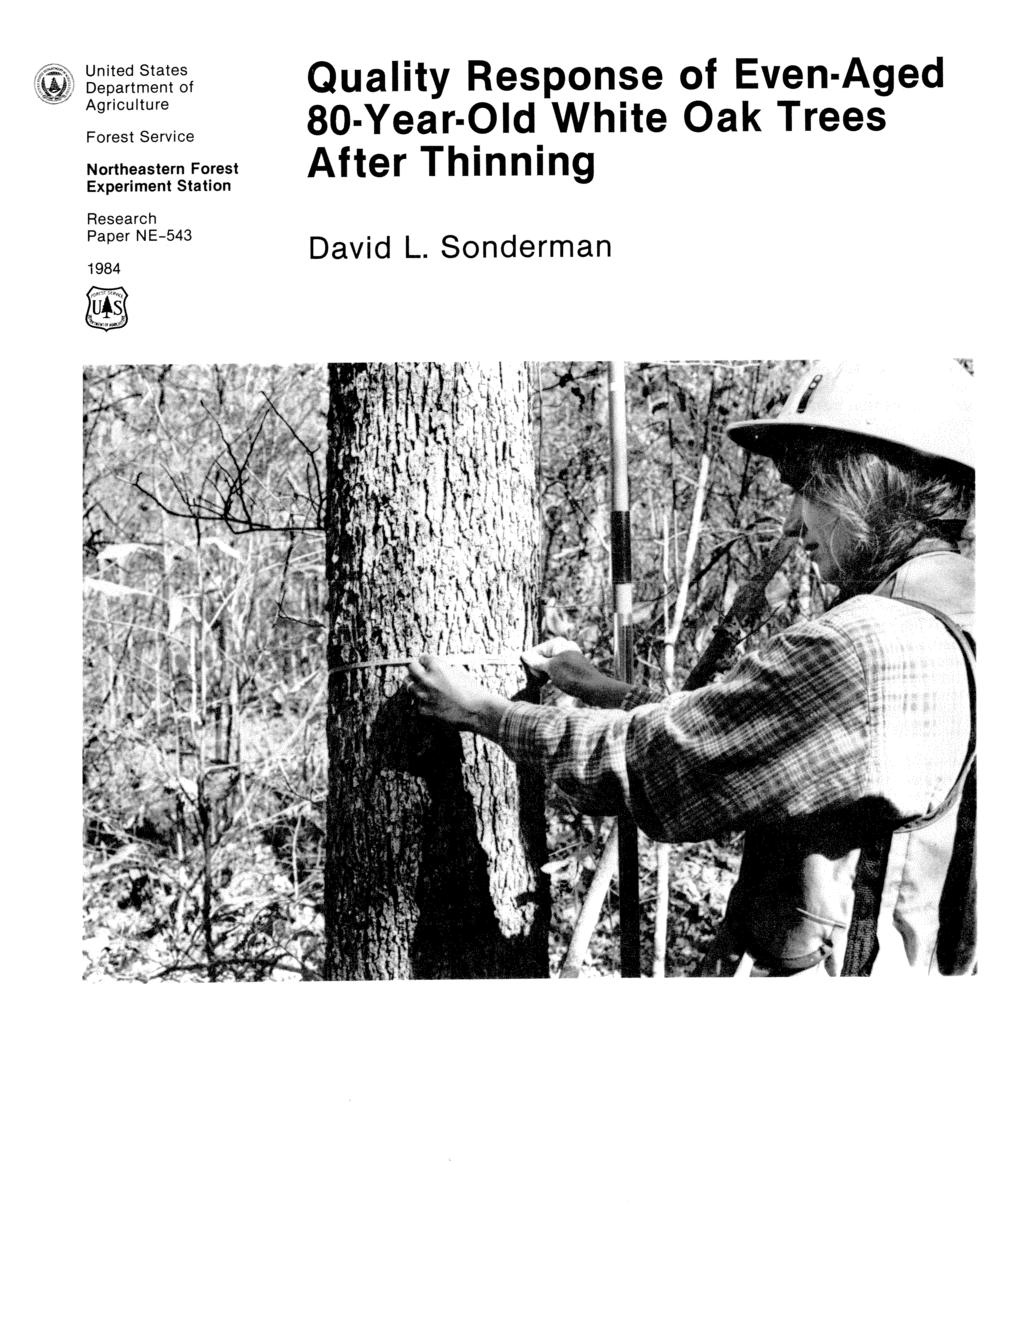 Forest Service Northeastern Forest Experiment Station Research Paper N E-543